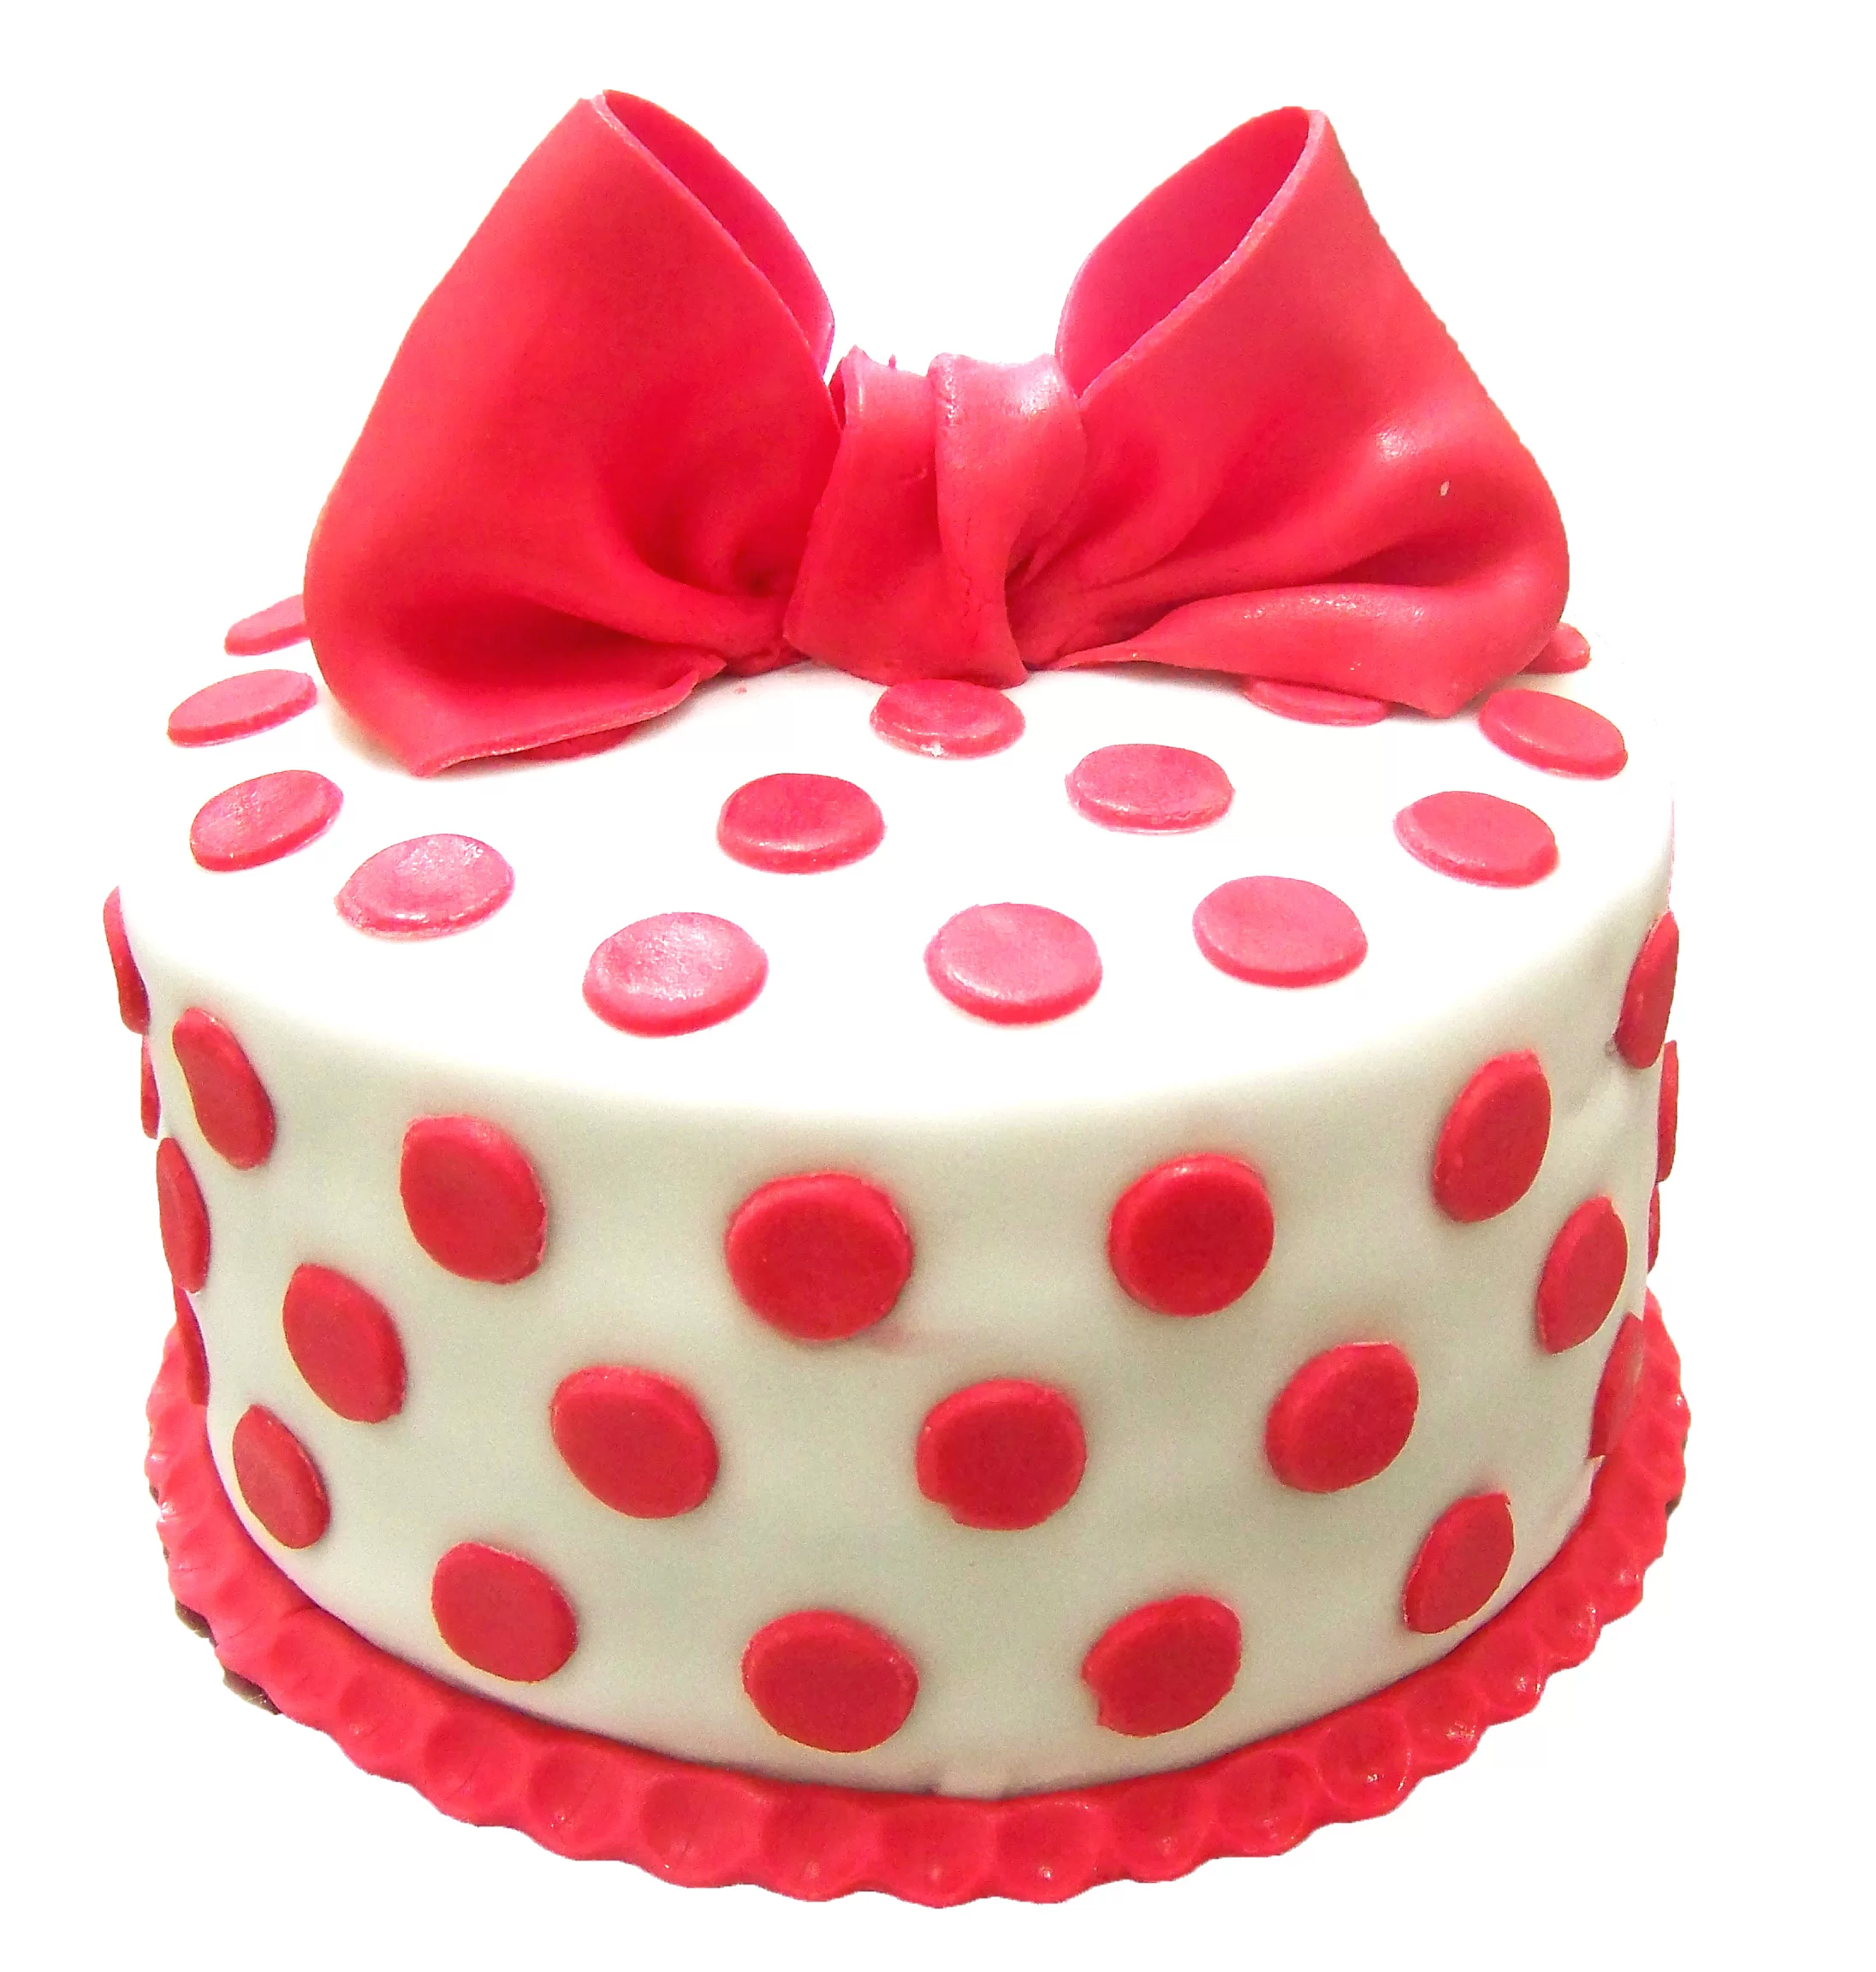 Cake Delivery in Gurgaon | Order Online at Gurgaon Bakers